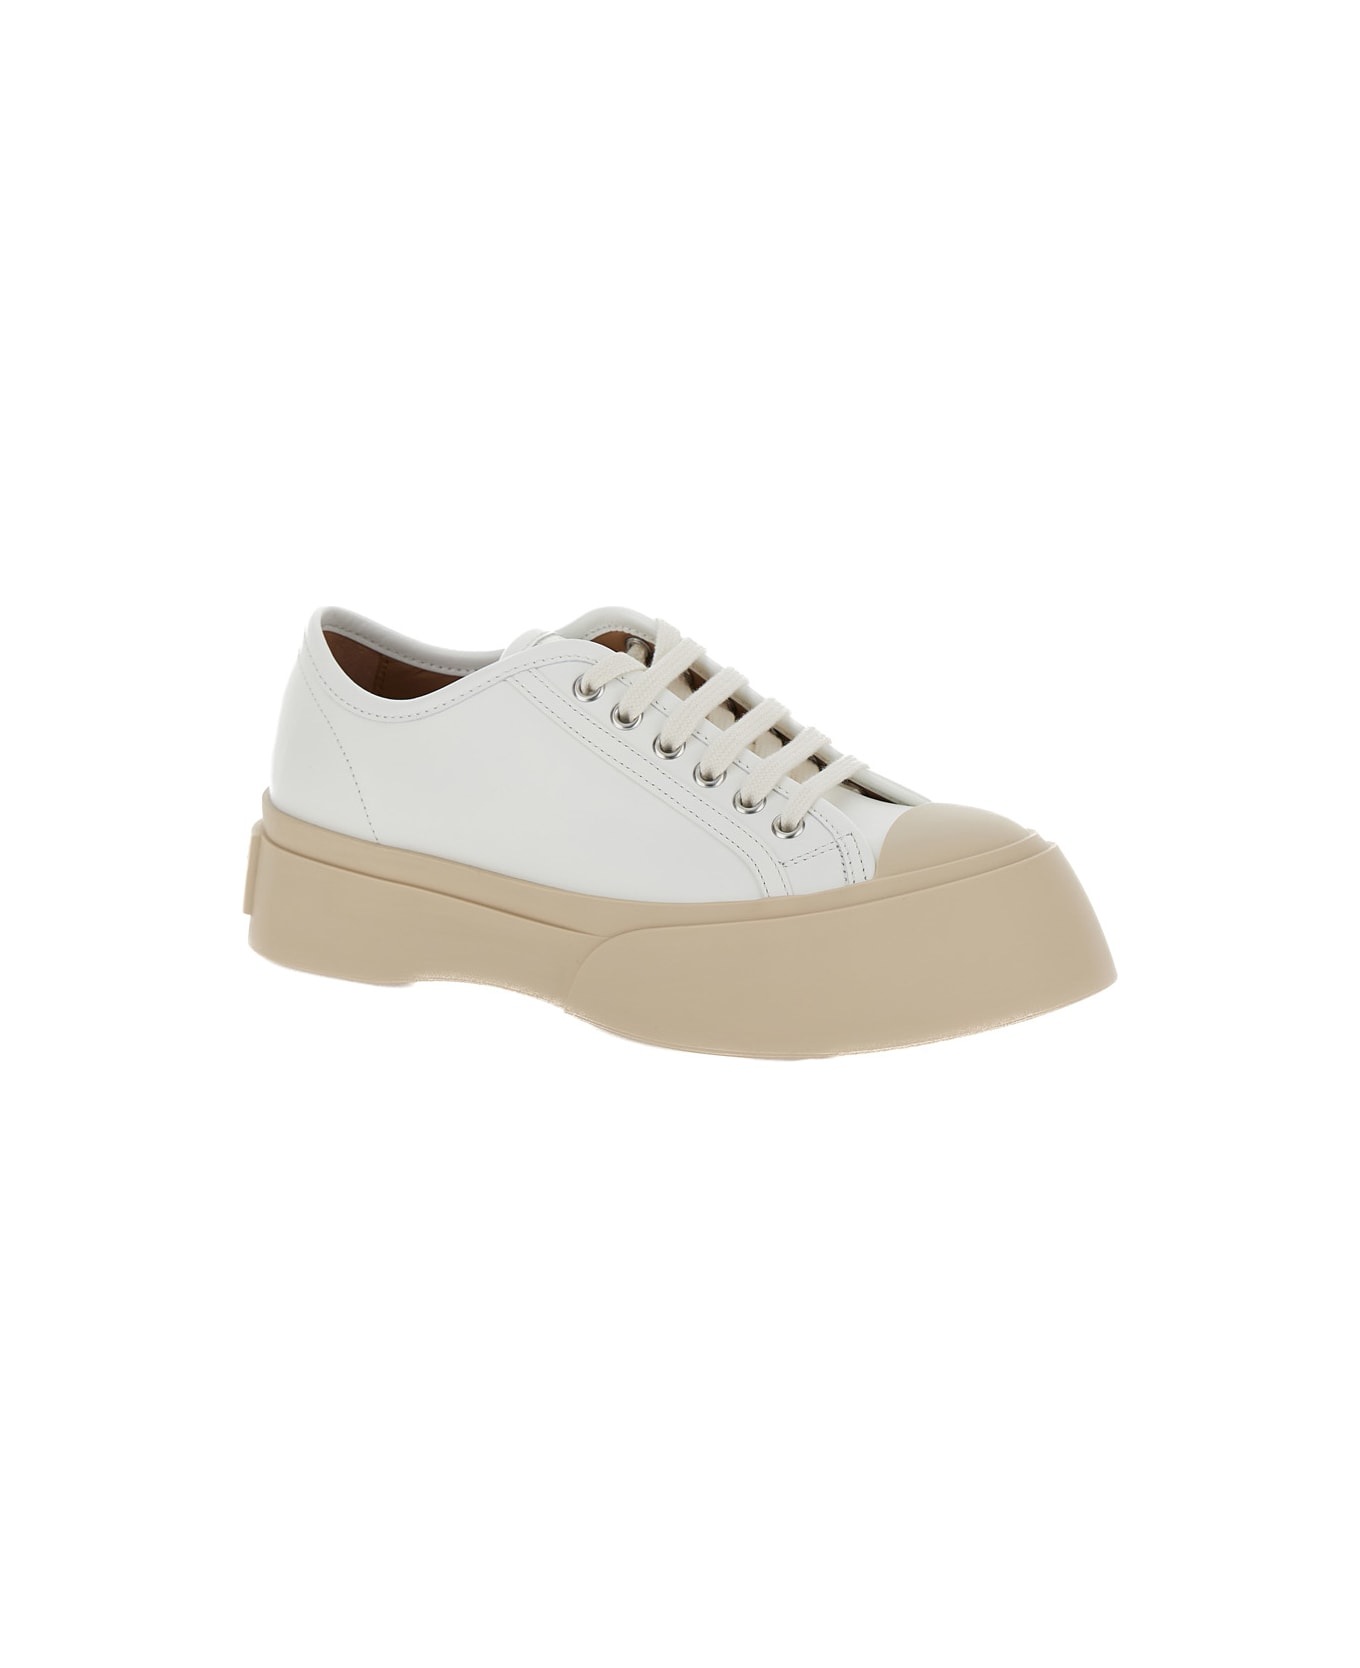 Marni 'pablo' White Sneakers With Lace Up Closure In Leather Woman - White スニーカー